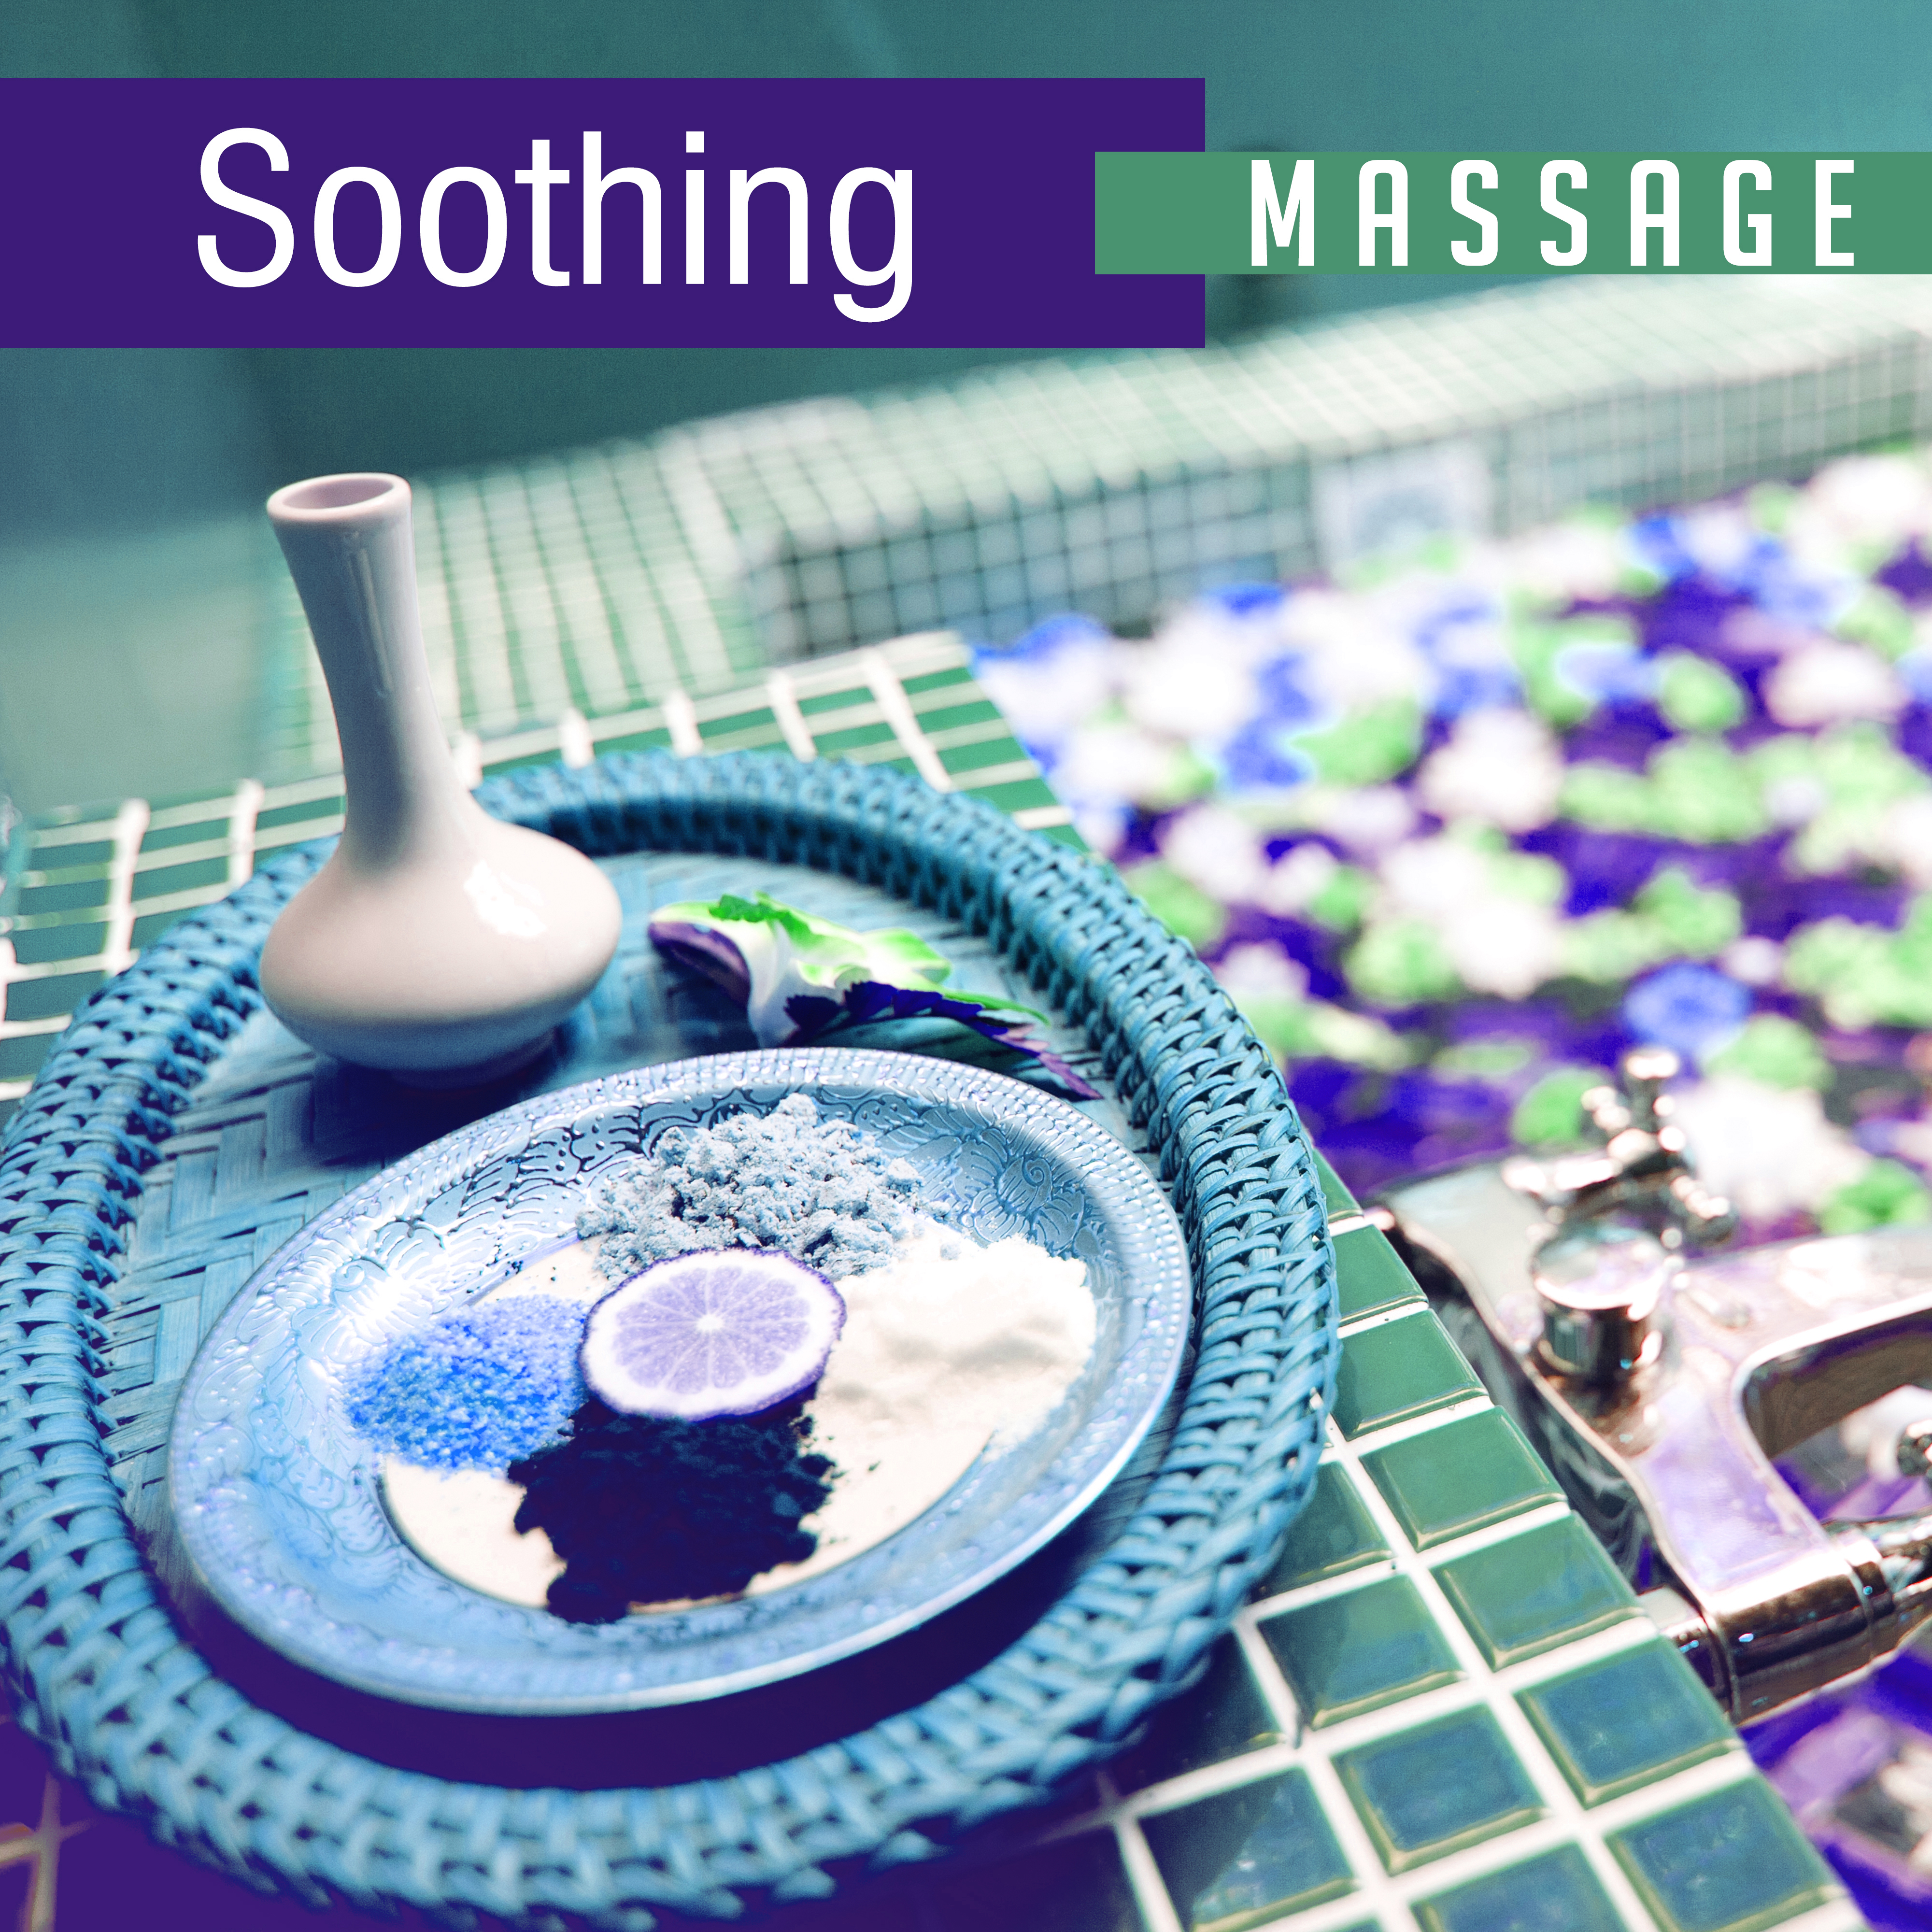 Soothing Massage – Sounds of Water, Relax, Music for Body, Deep Sleep, Asian Zen, Bliss Spa